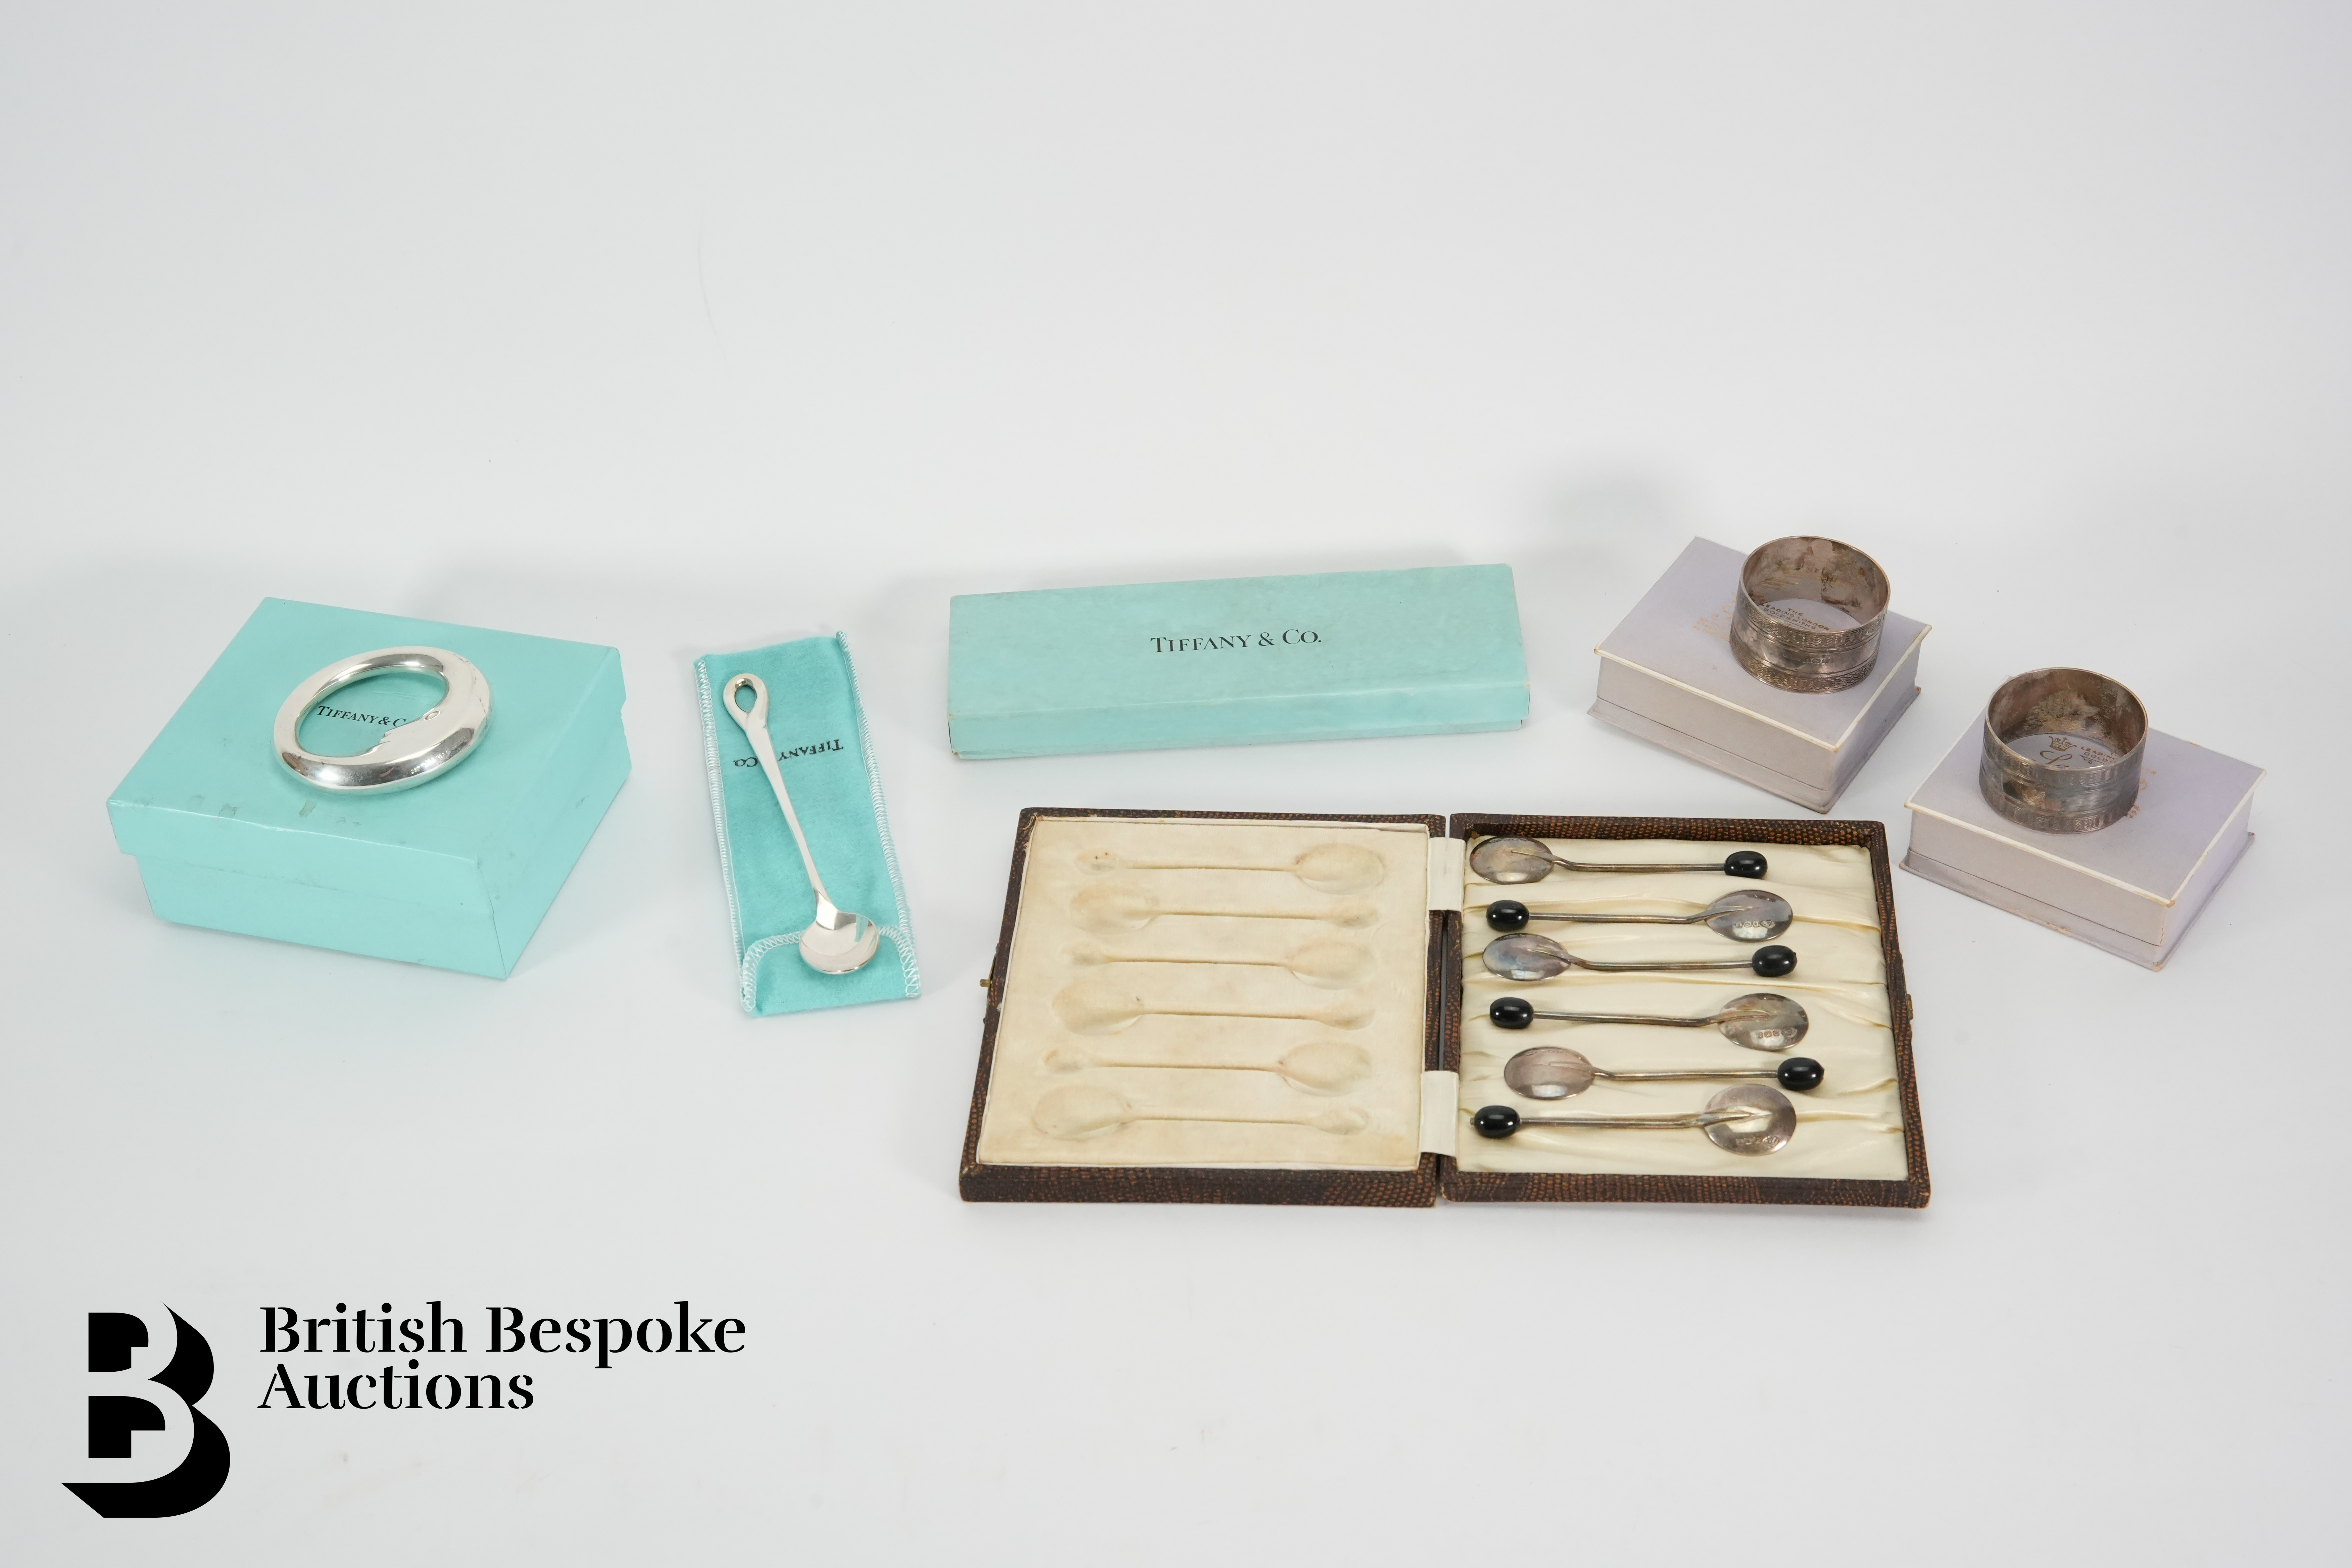 Tiffany & Co Silver Spoon and Baby Rattle